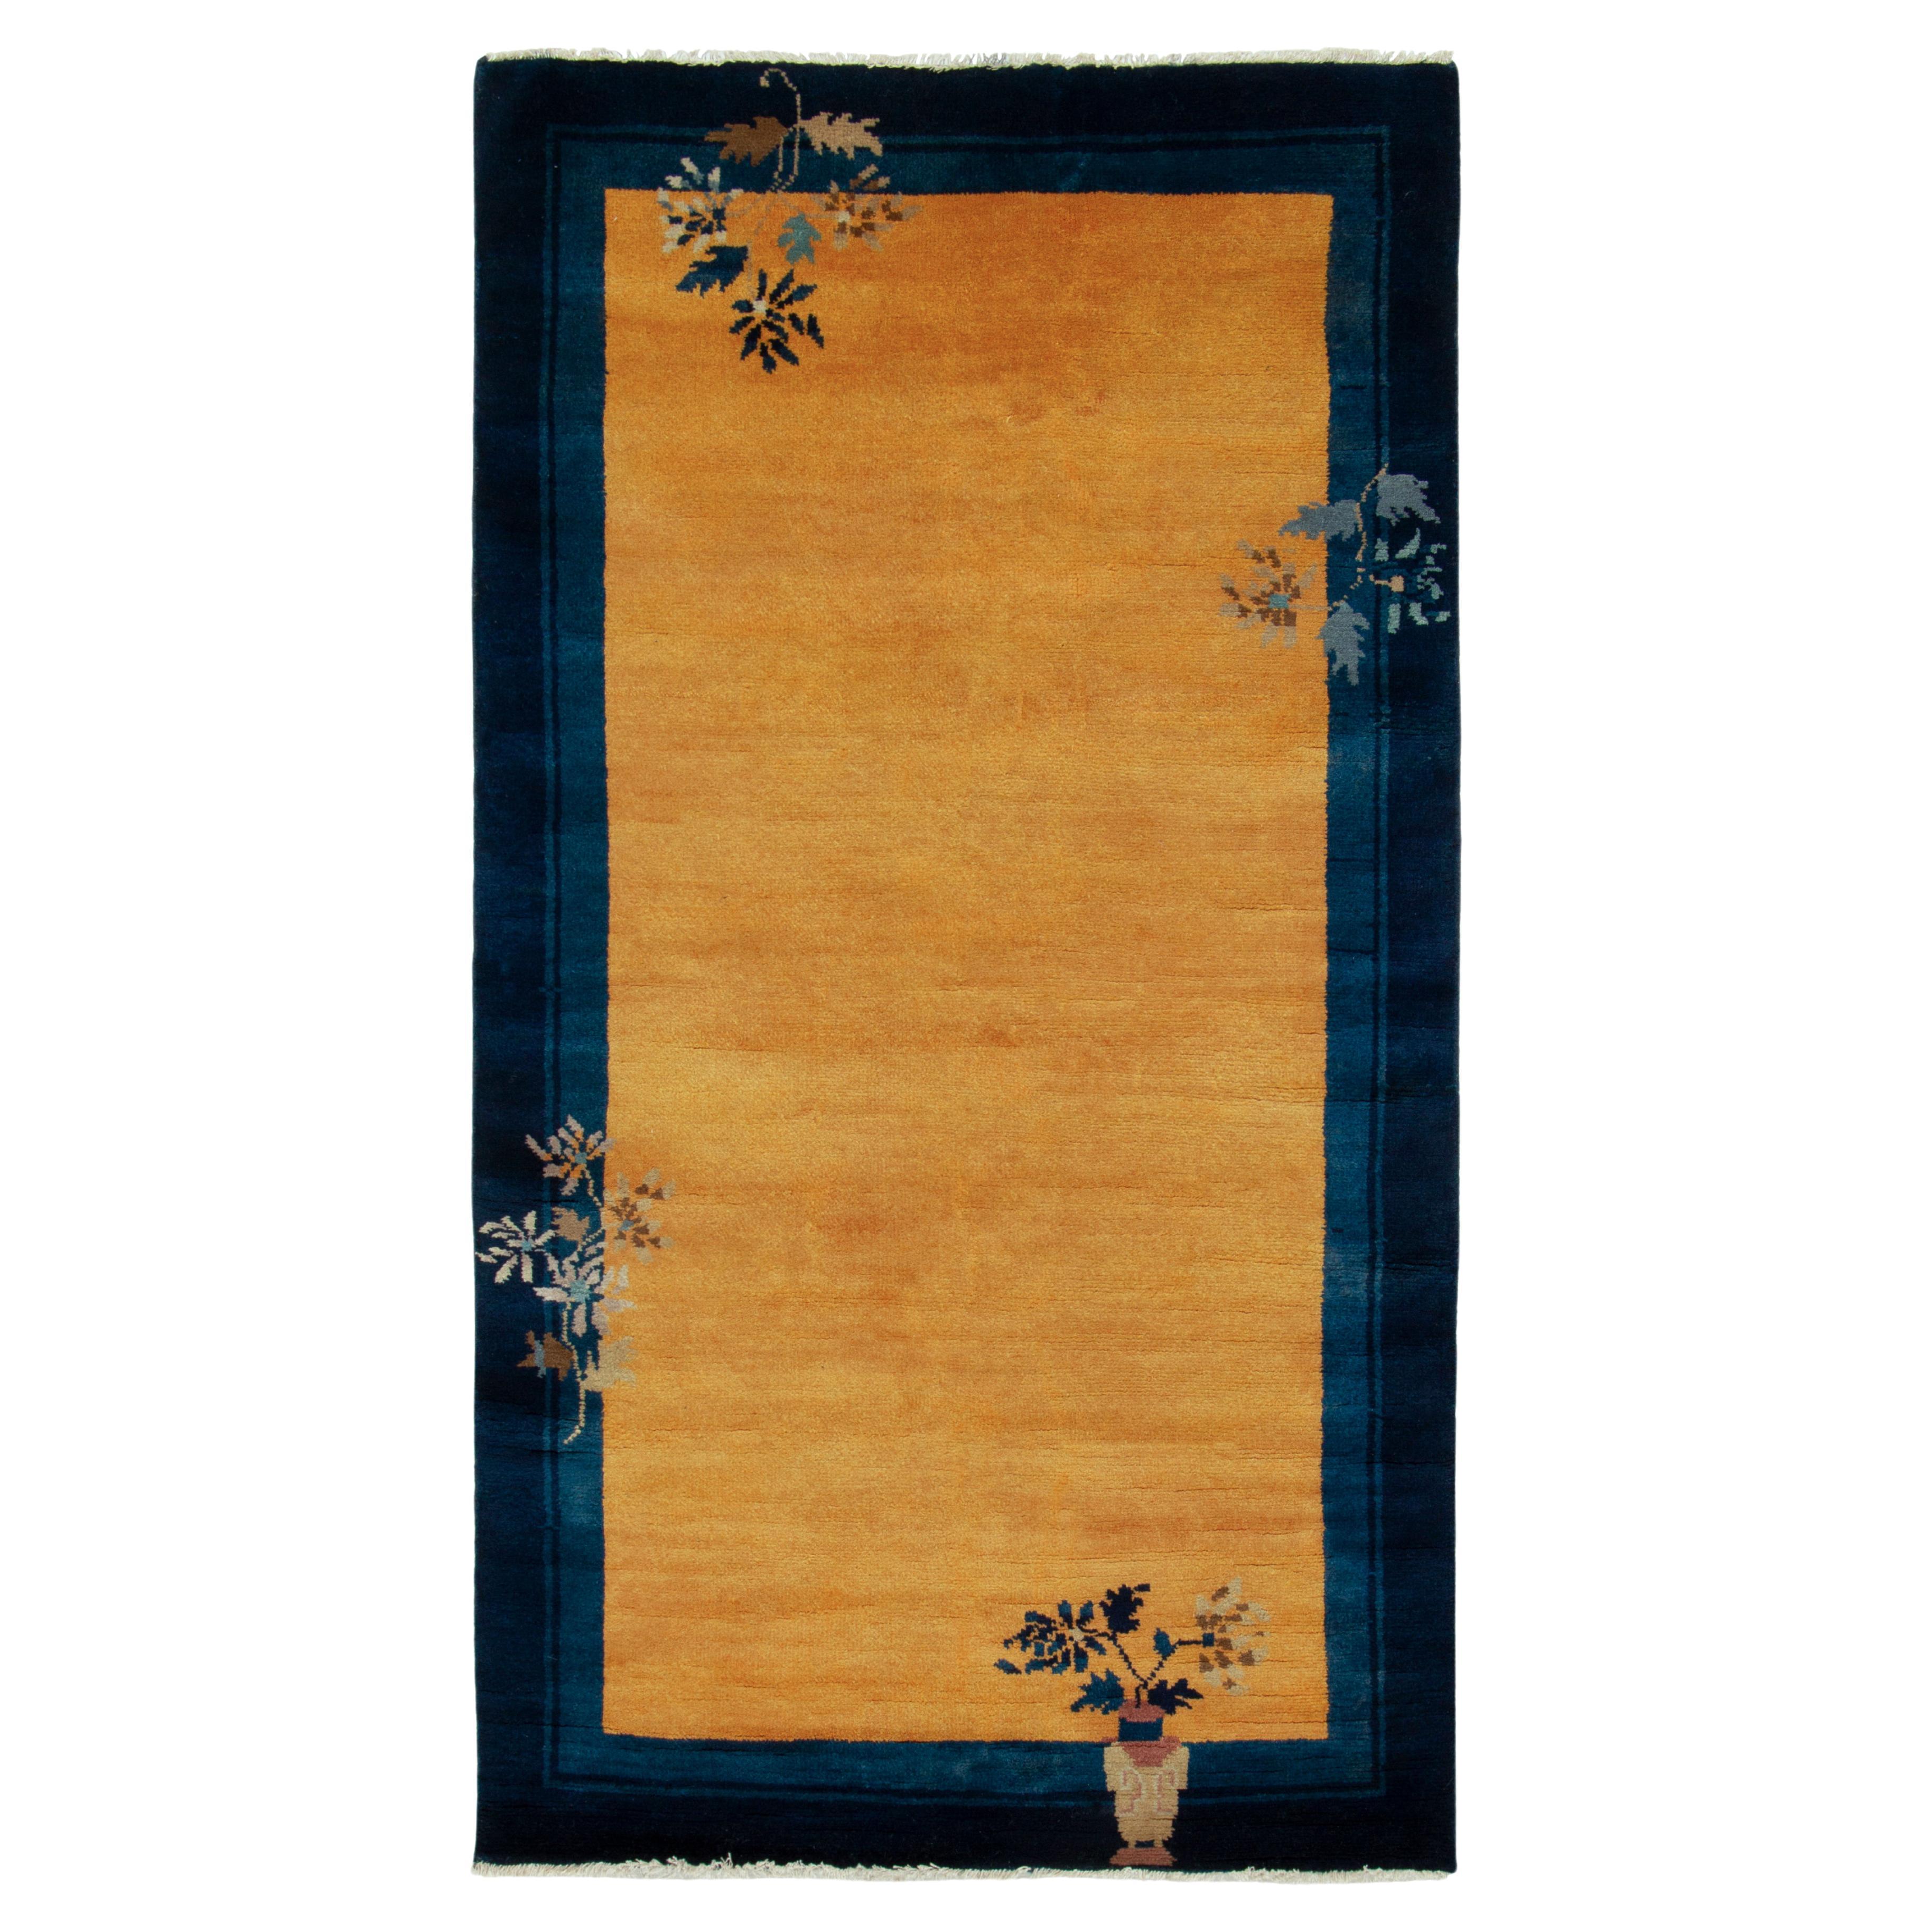 Vintage Chinese Deco Style Rug in Gold, Blue Brown Floral Pattern by Rug & Kilim